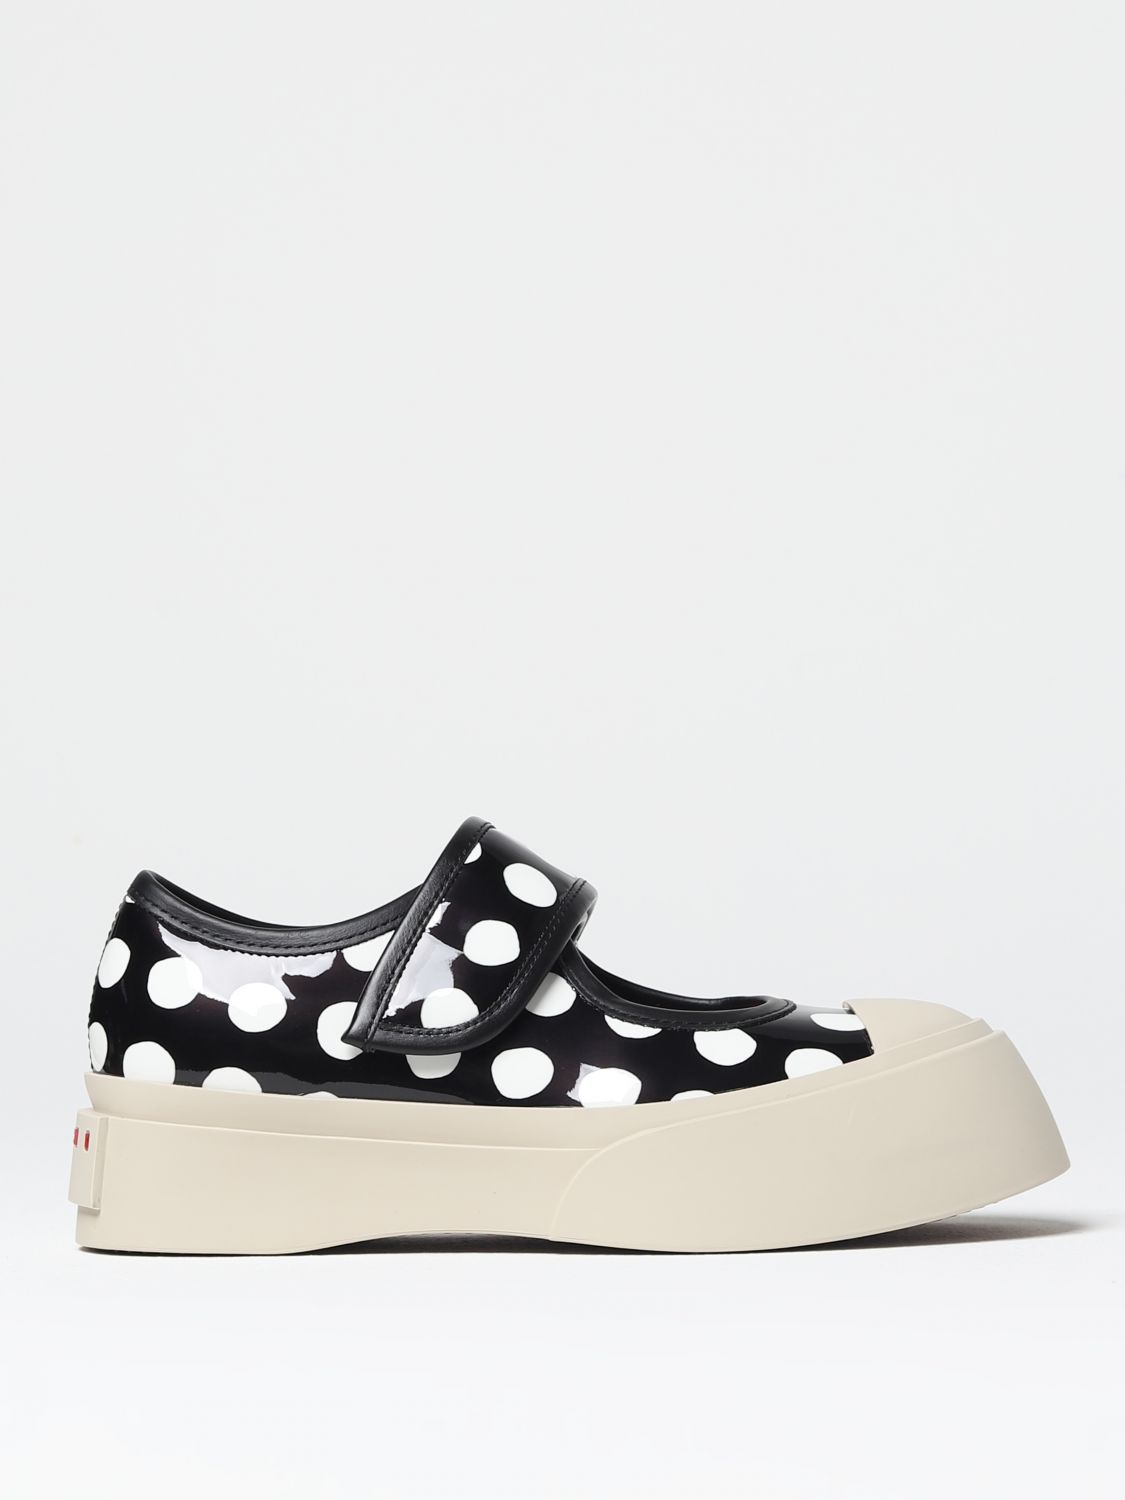 MARNI PABLO SNEAKERS IN POLKA DOT PATENT LEATHER,F02955002